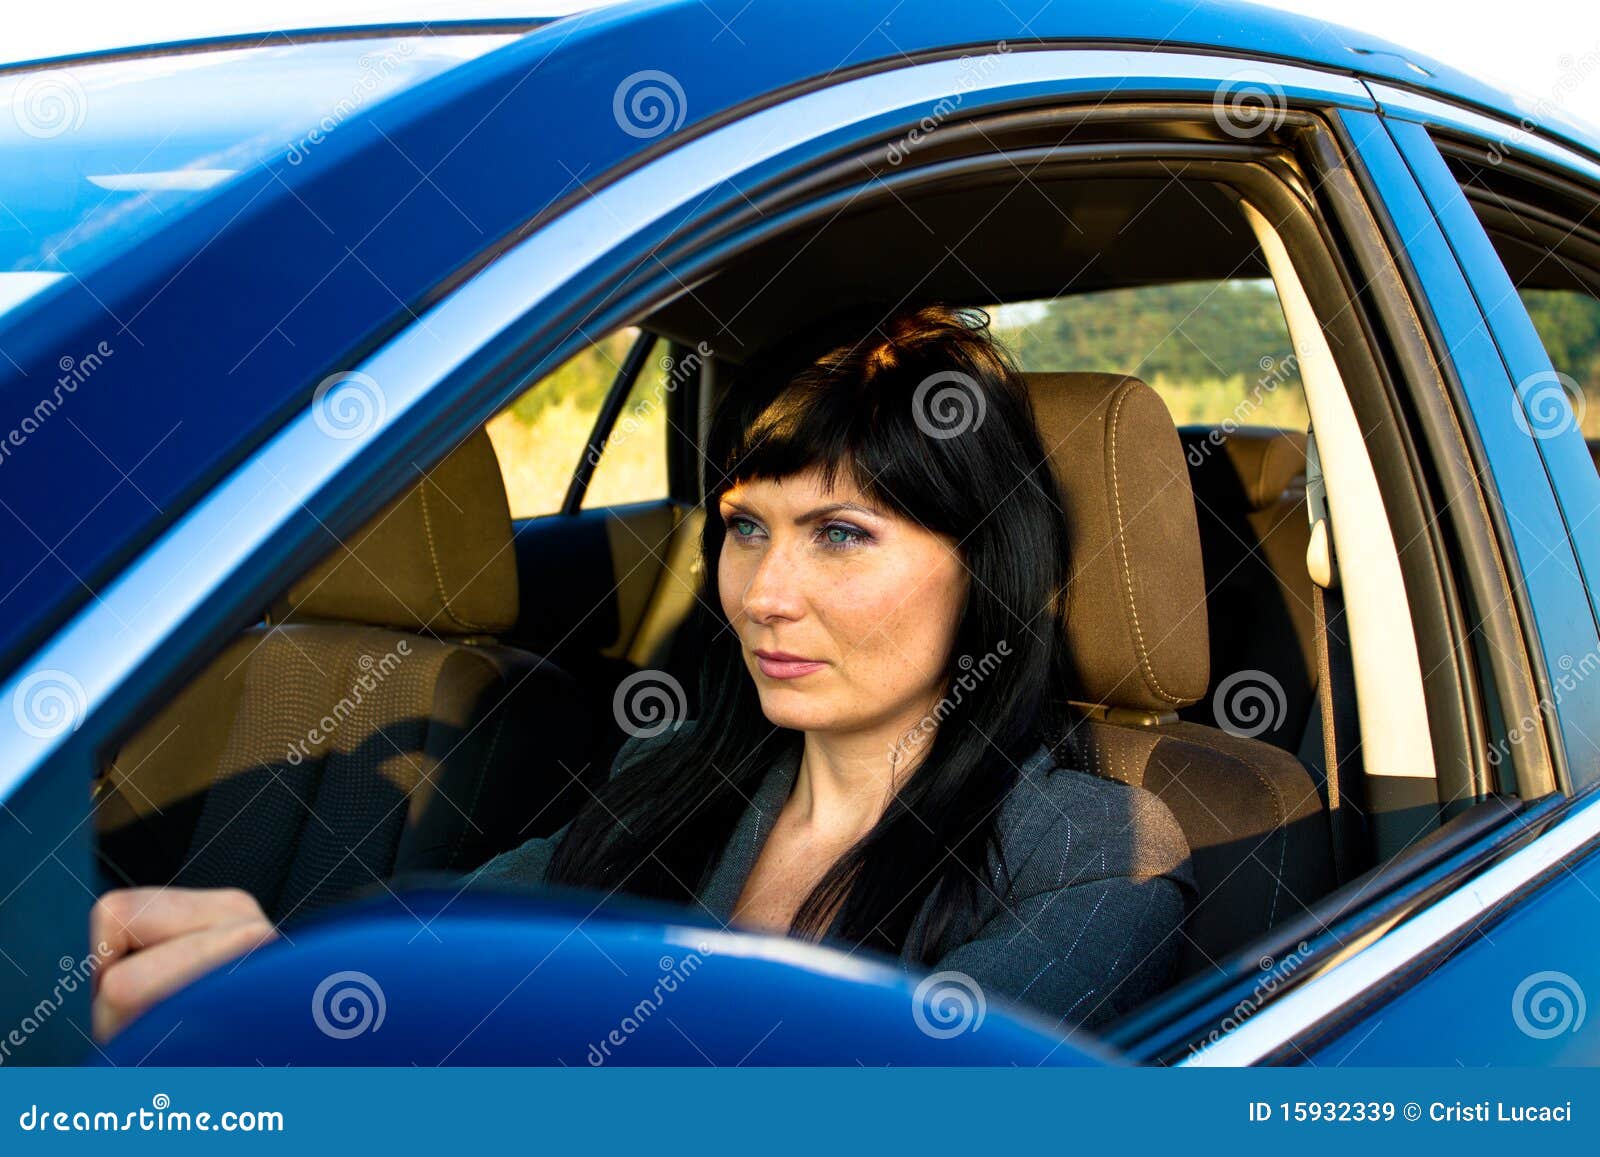 truckers view of women in cars